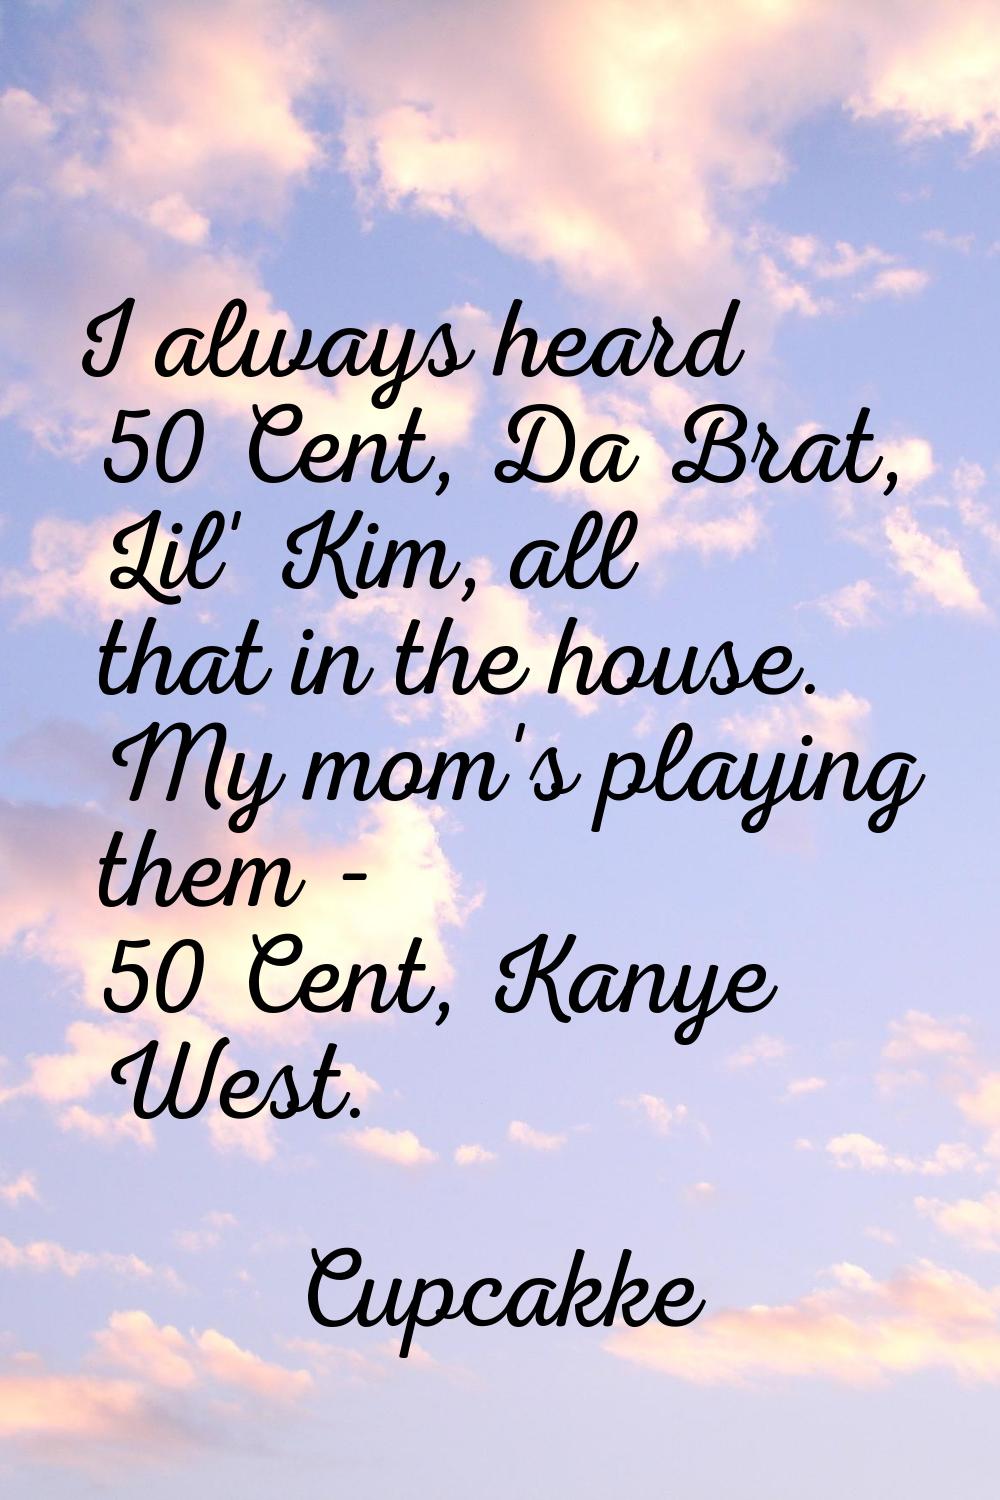 I always heard 50 Cent, Da Brat, Lil' Kim, all that in the house. My mom's playing them - 50 Cent, 